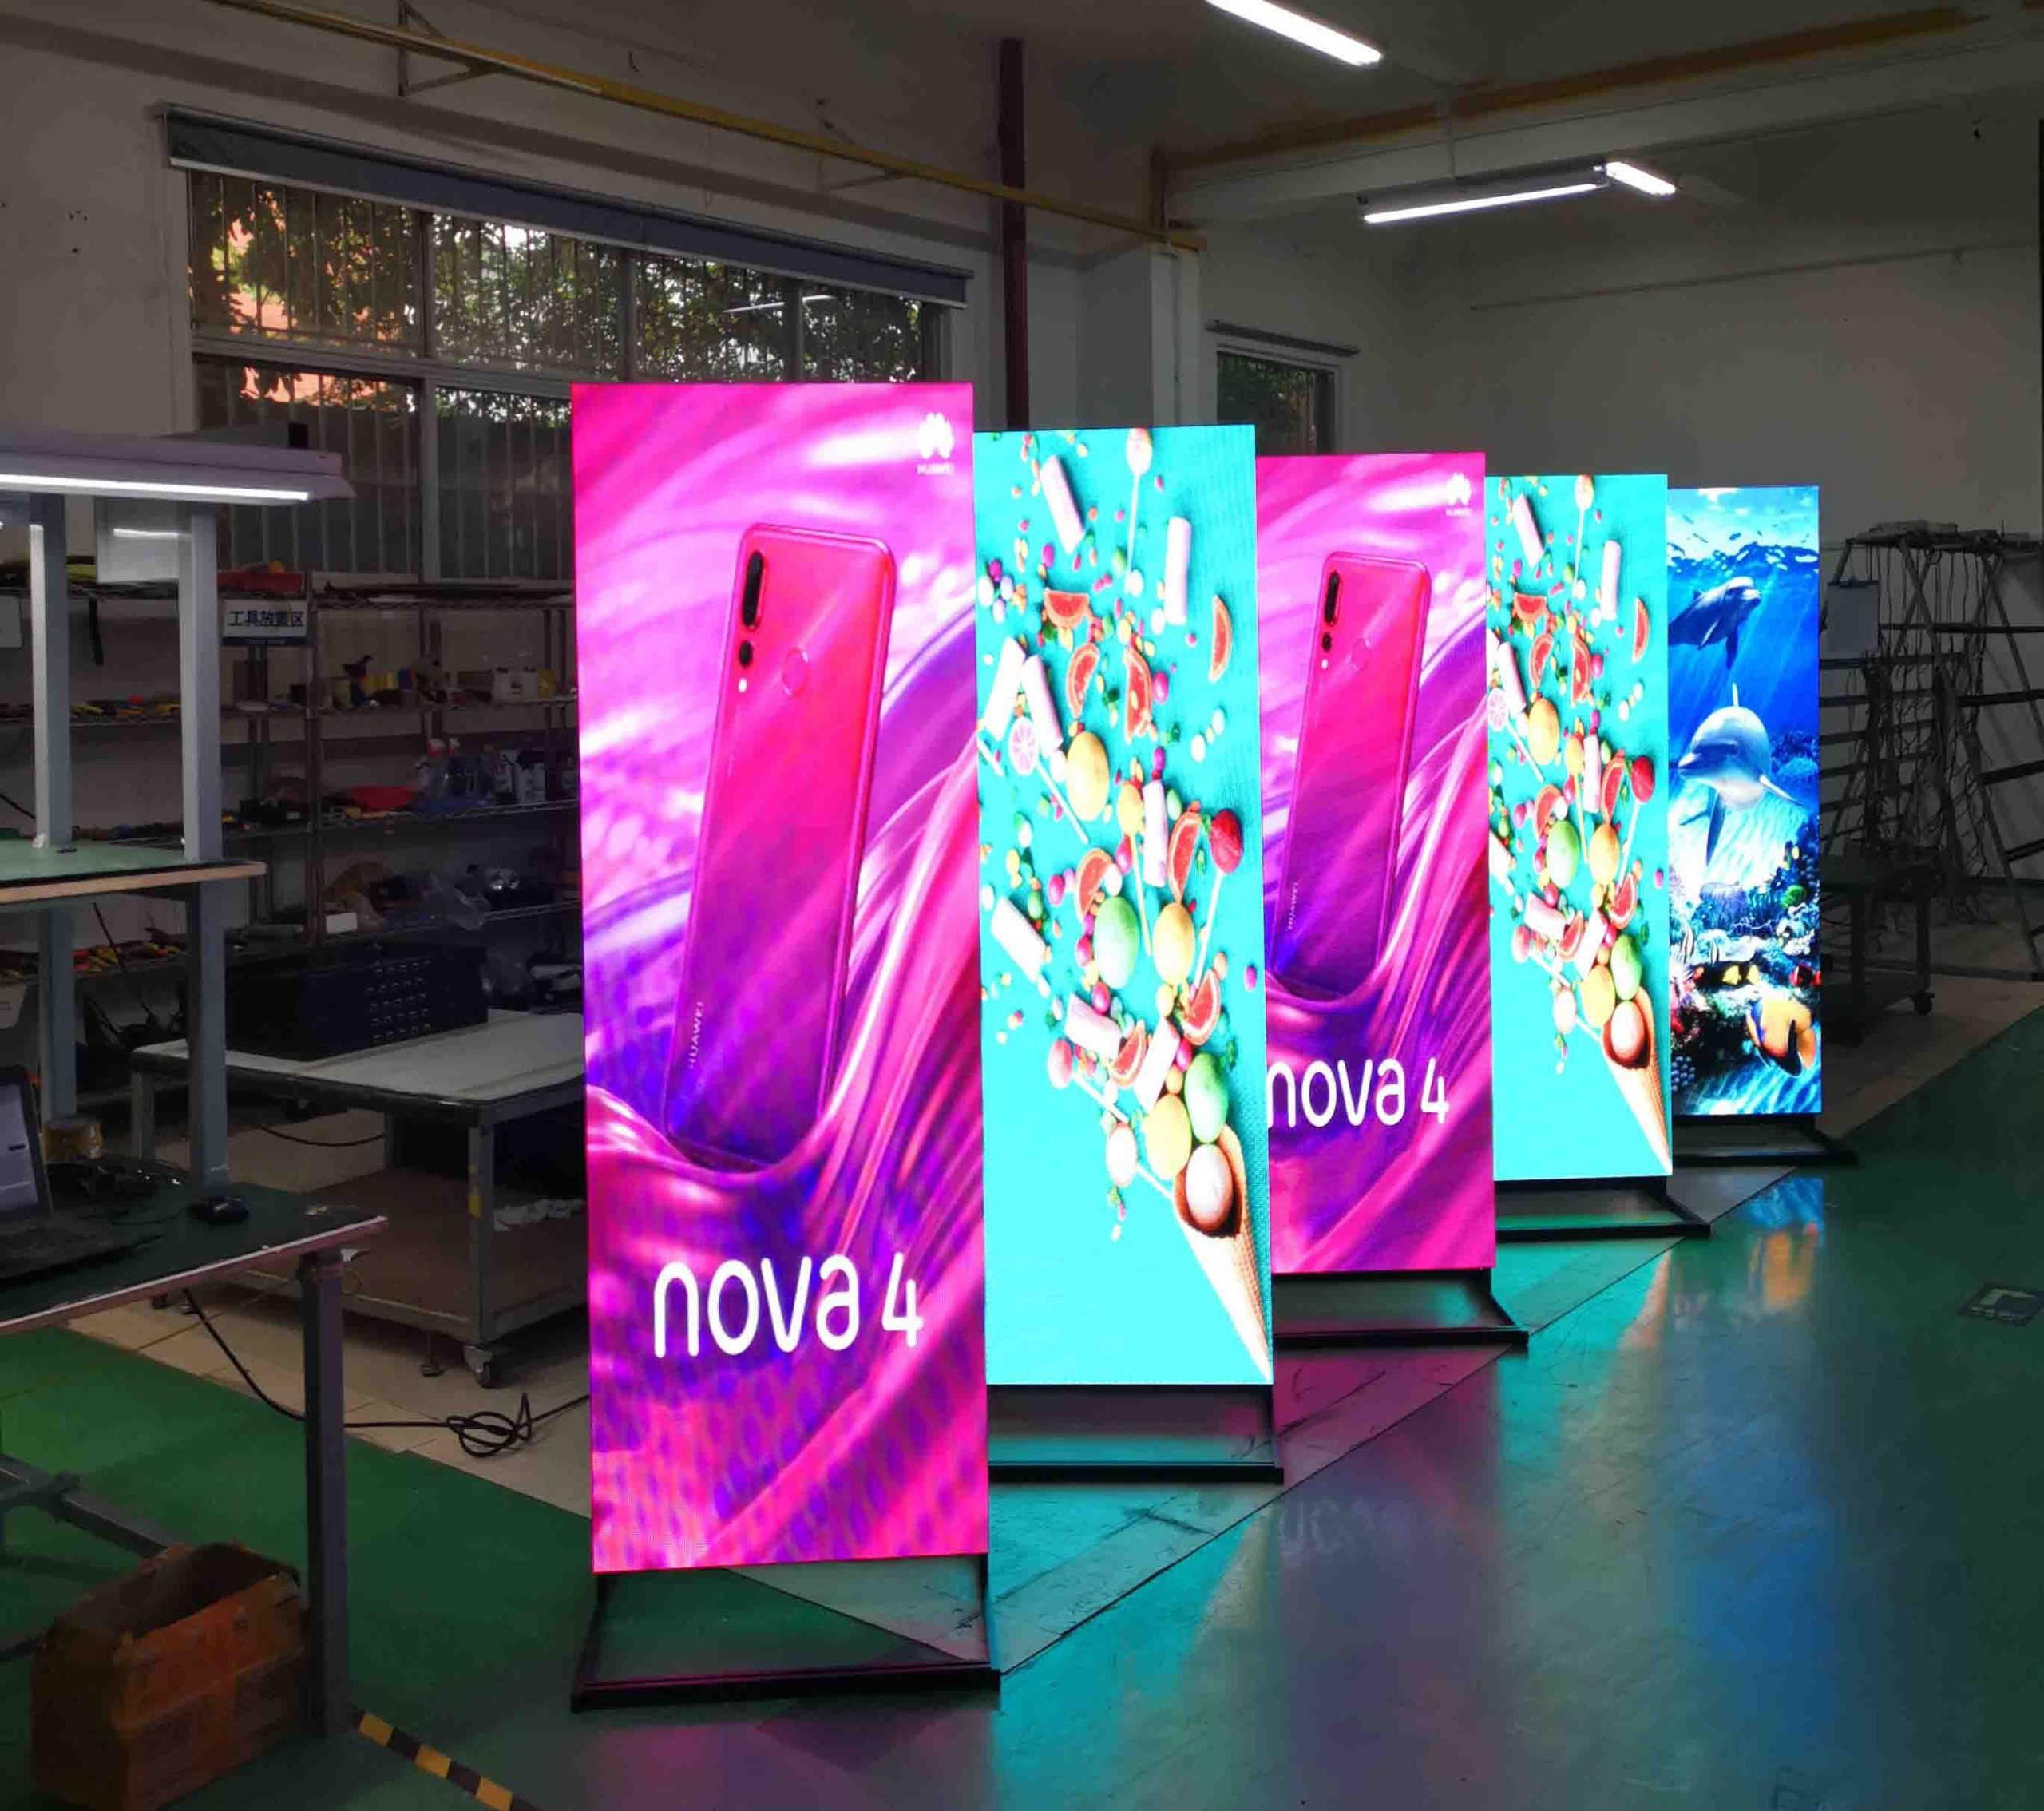 The Benefits of an LED Digital Poster over Other Types of Displays